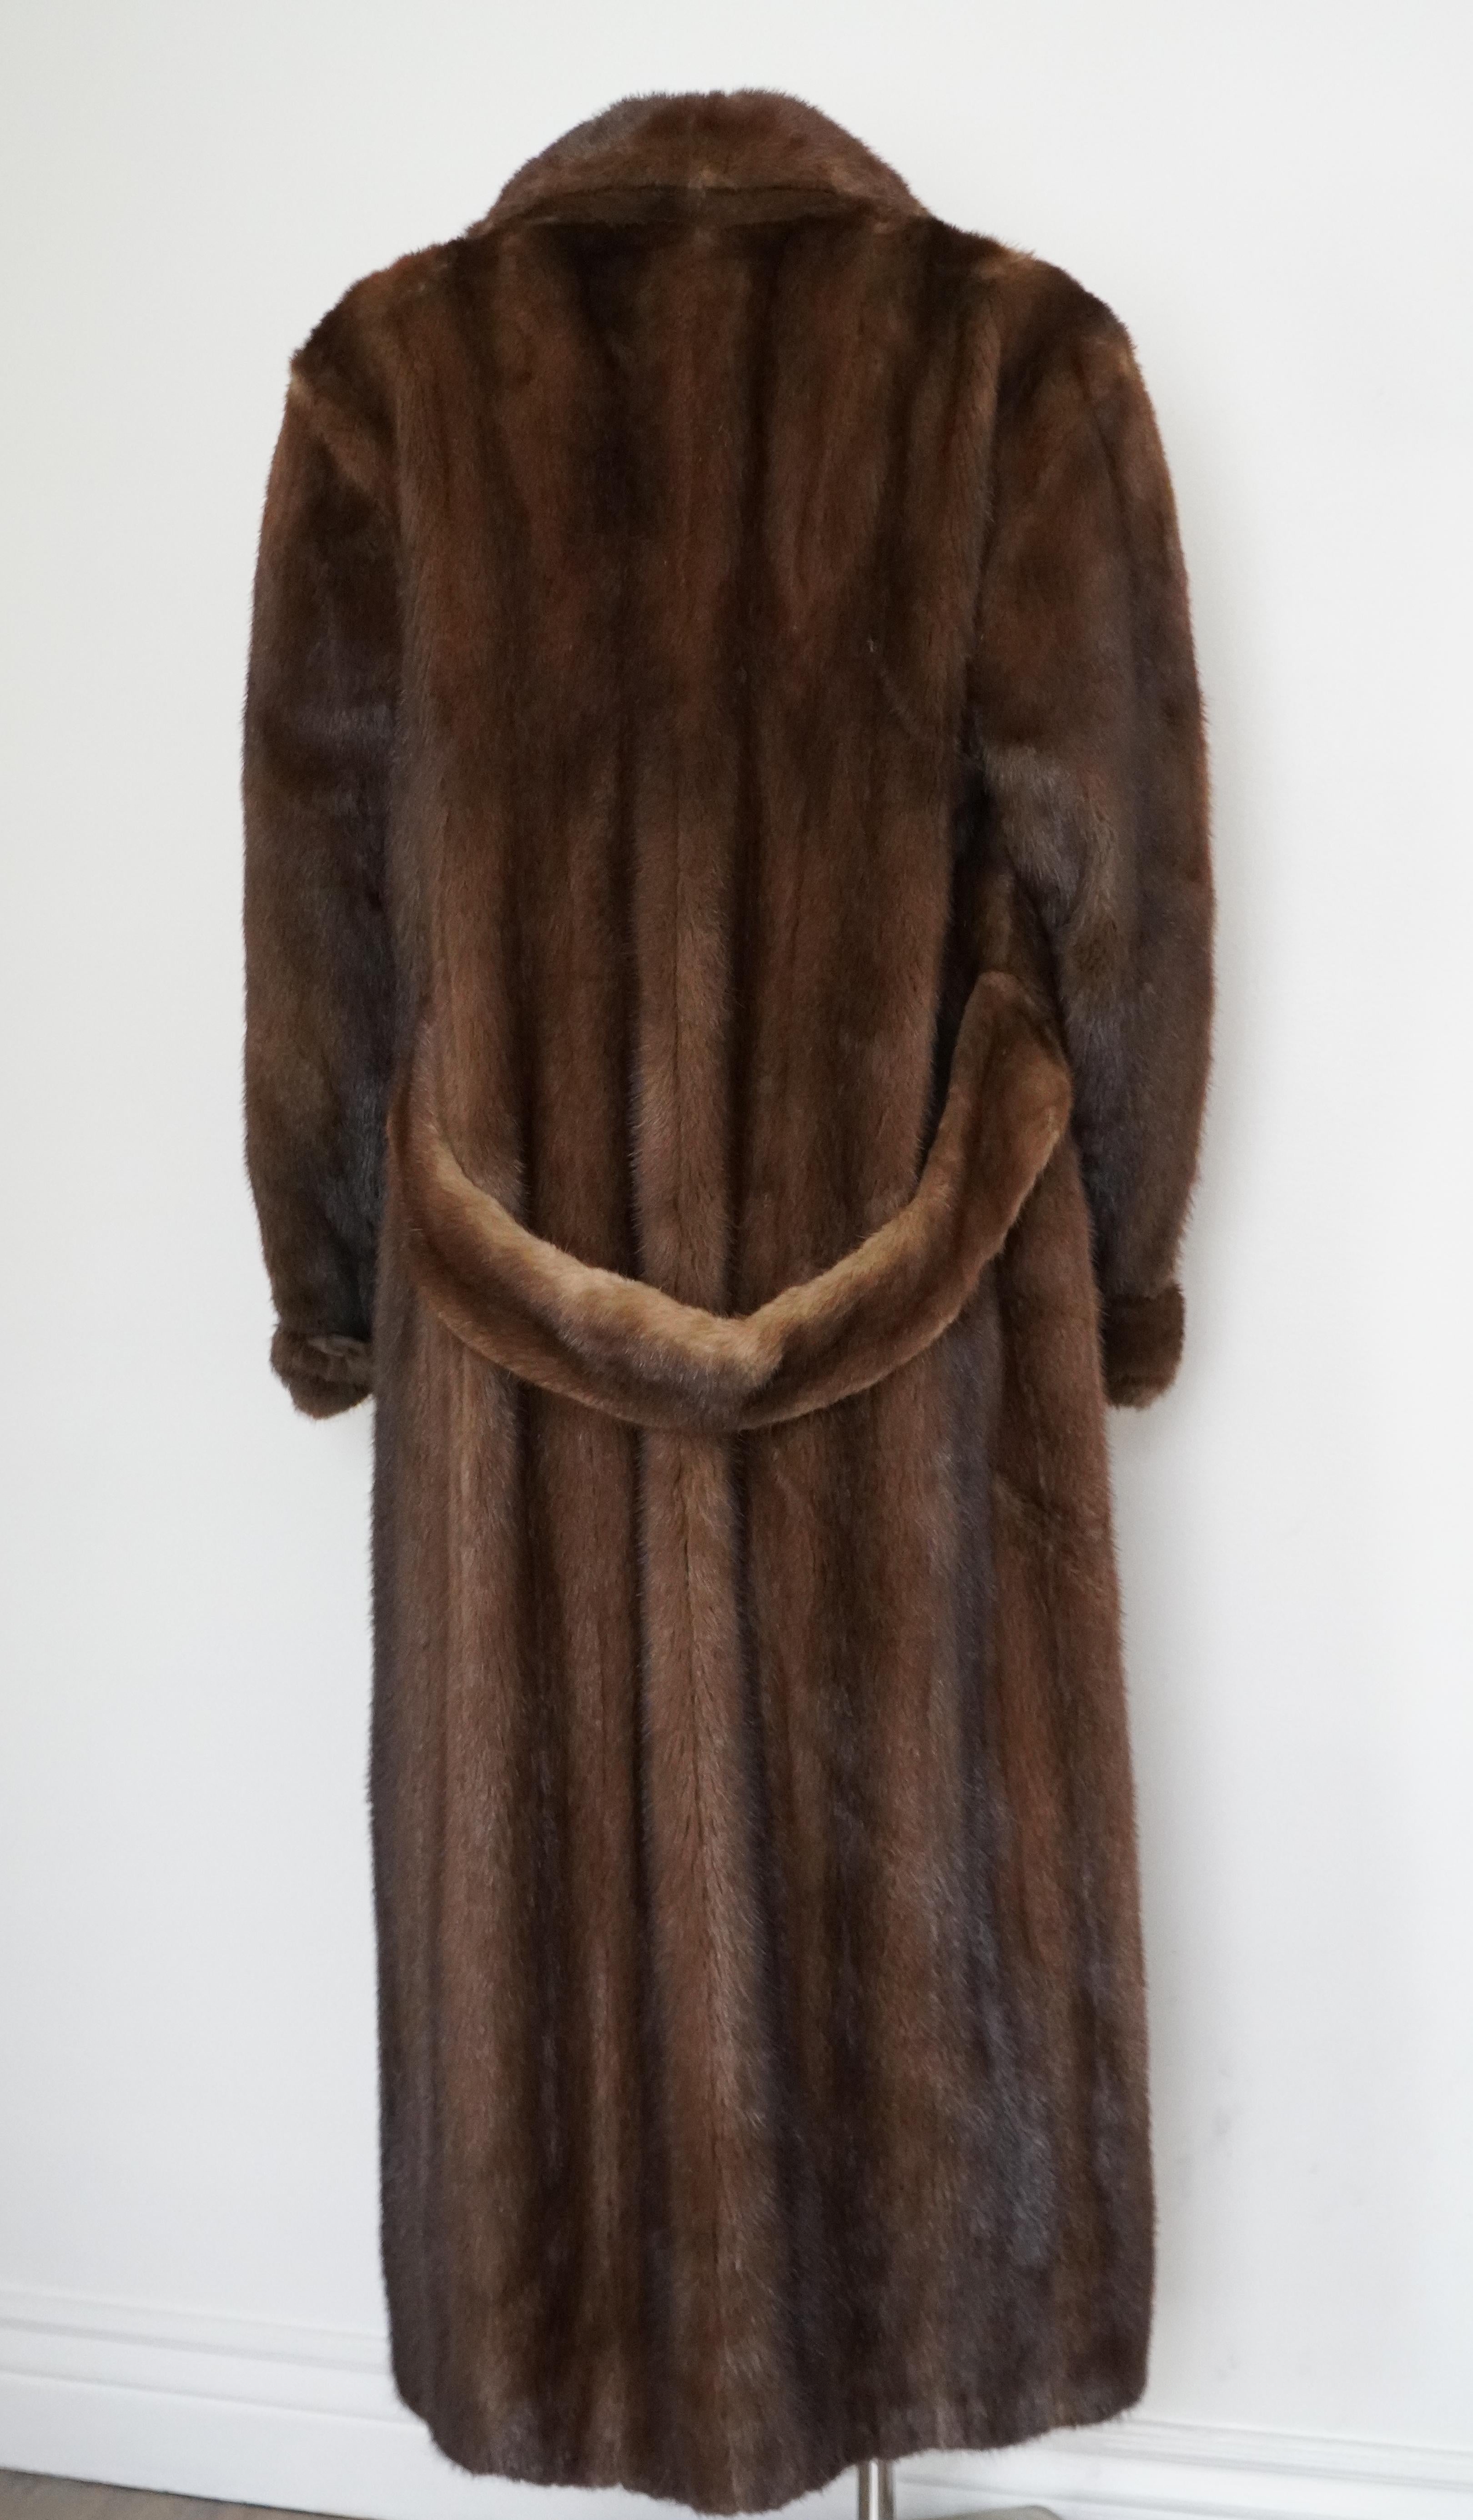 This exquisite vintage genuine mink fur coat exudes timeless elegance and luxury. Circa 1990s, made by Brothers II Style by Dimitrios NY. This chestnut brown coat is crafted with the finest quality genuine mink fur, it boasts a rich, lustrous